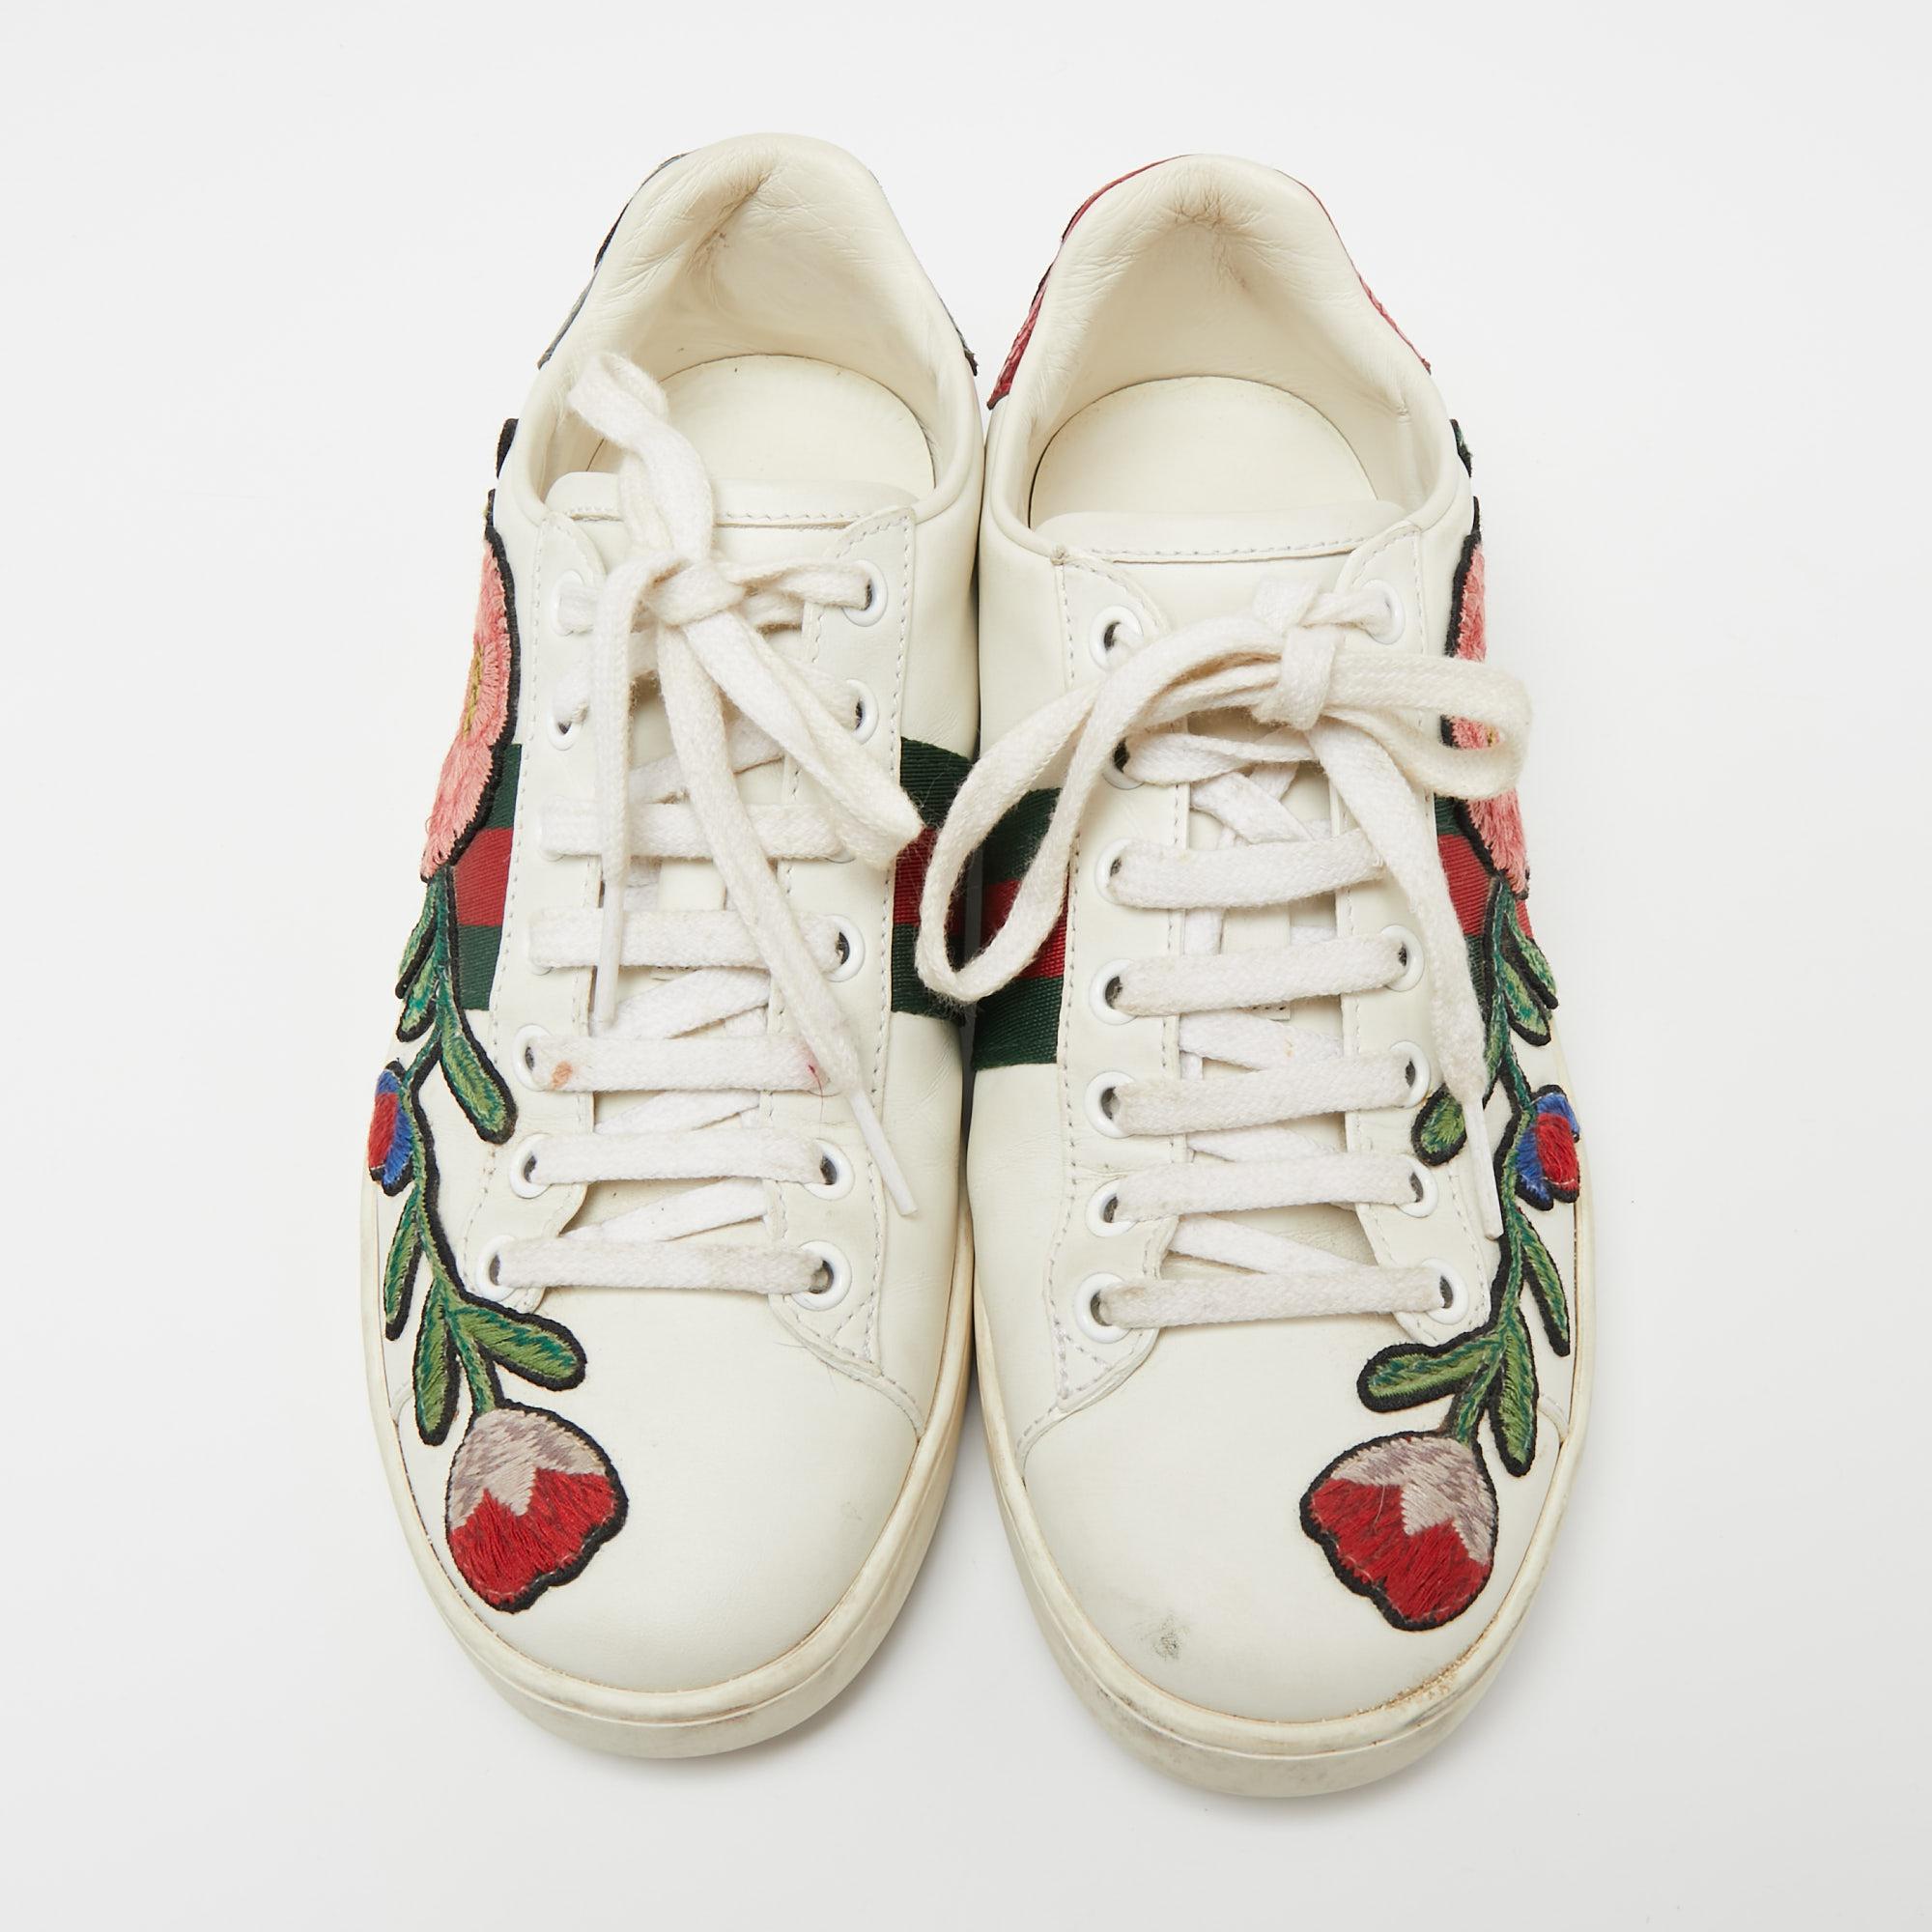 Gray Gucci White Floral Embroidered Leather Ace Low Top Sneakers Size 36.5